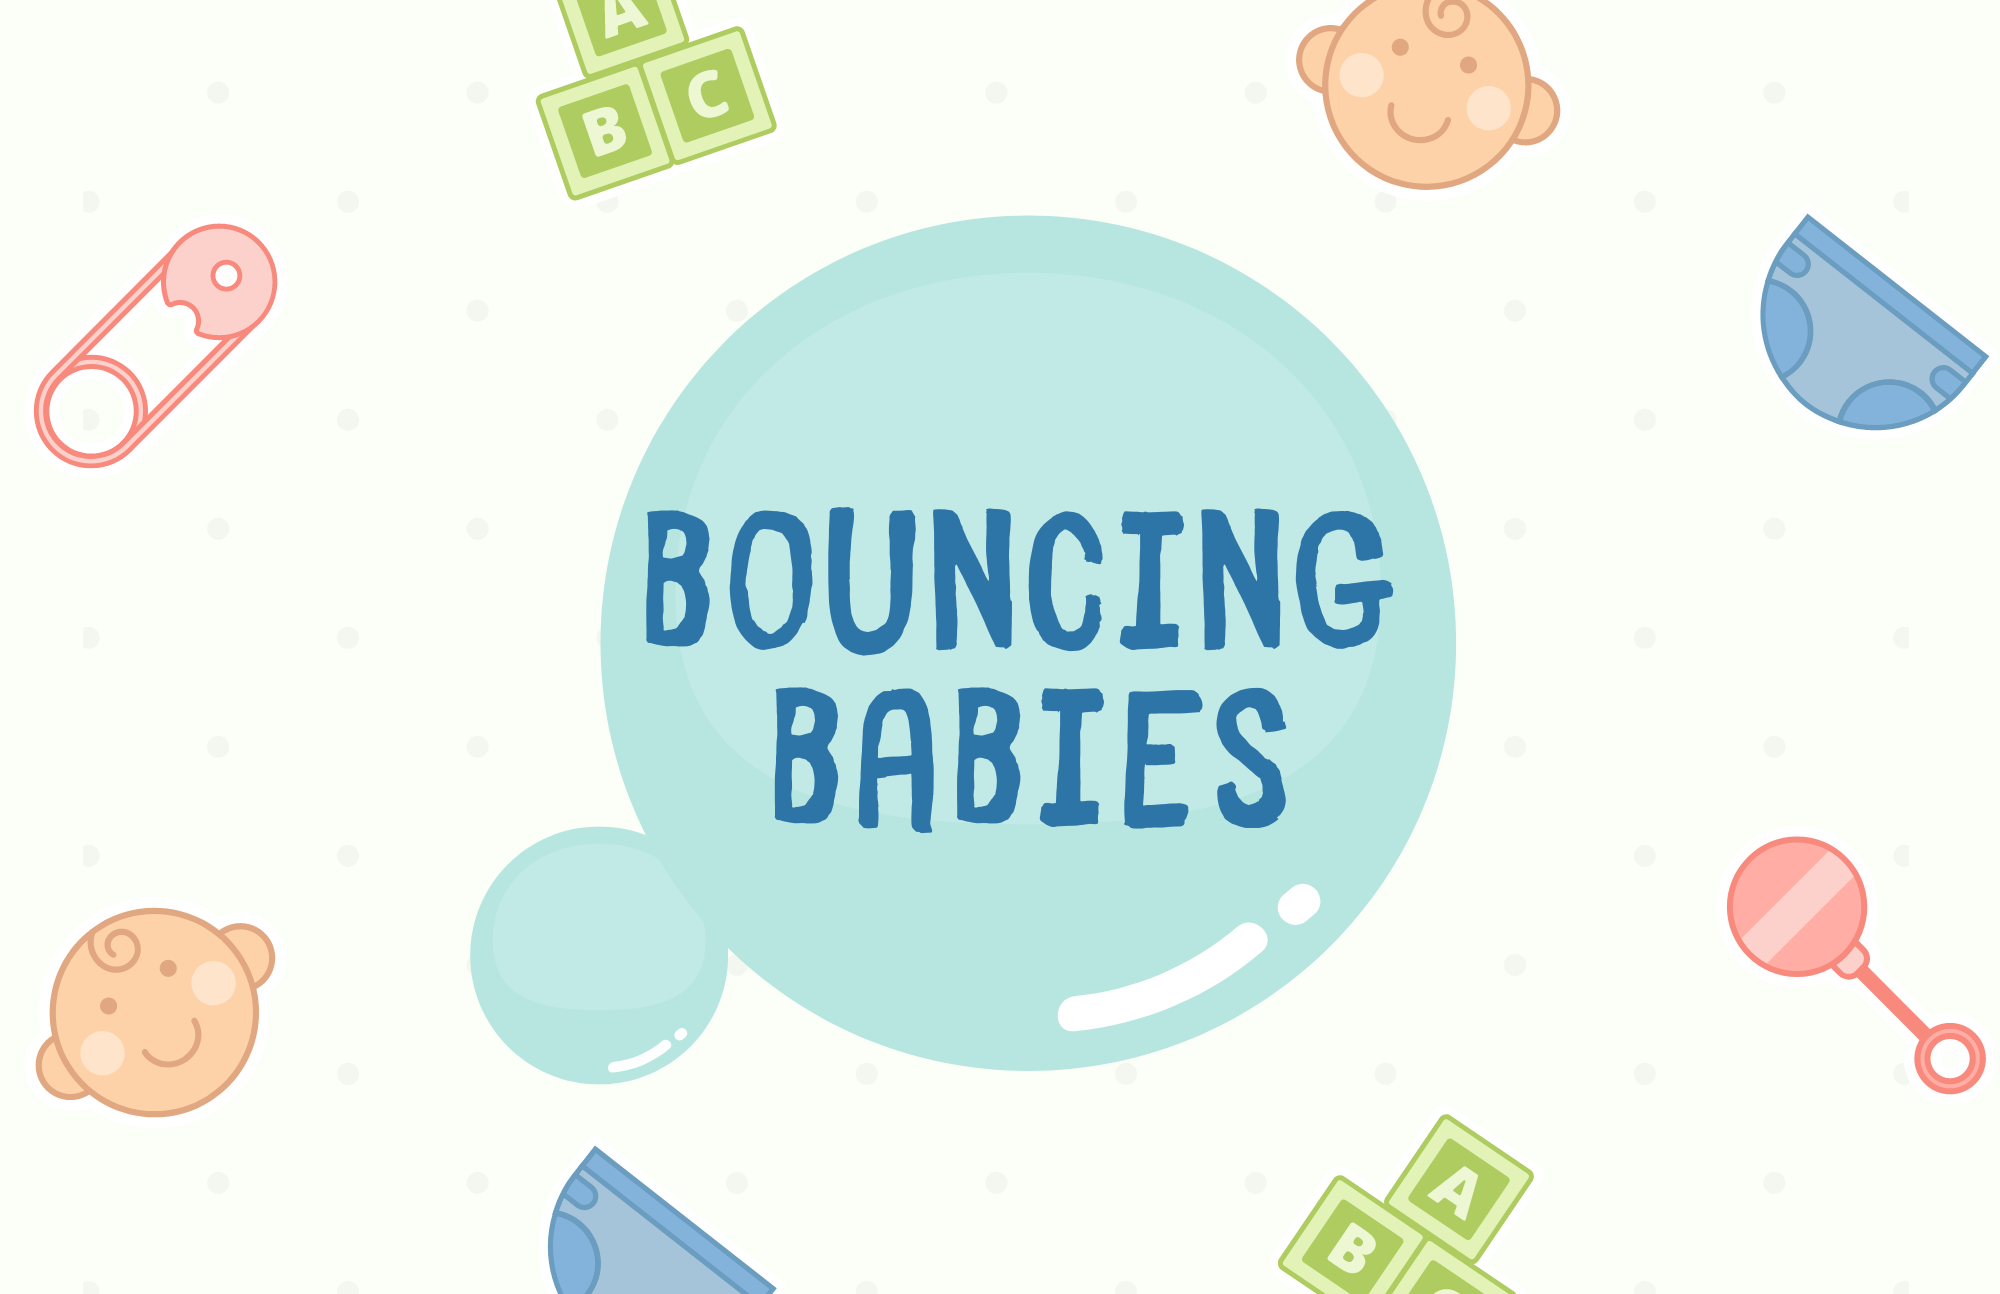 Bubbles with the text "Bouncing Babies" in the middle